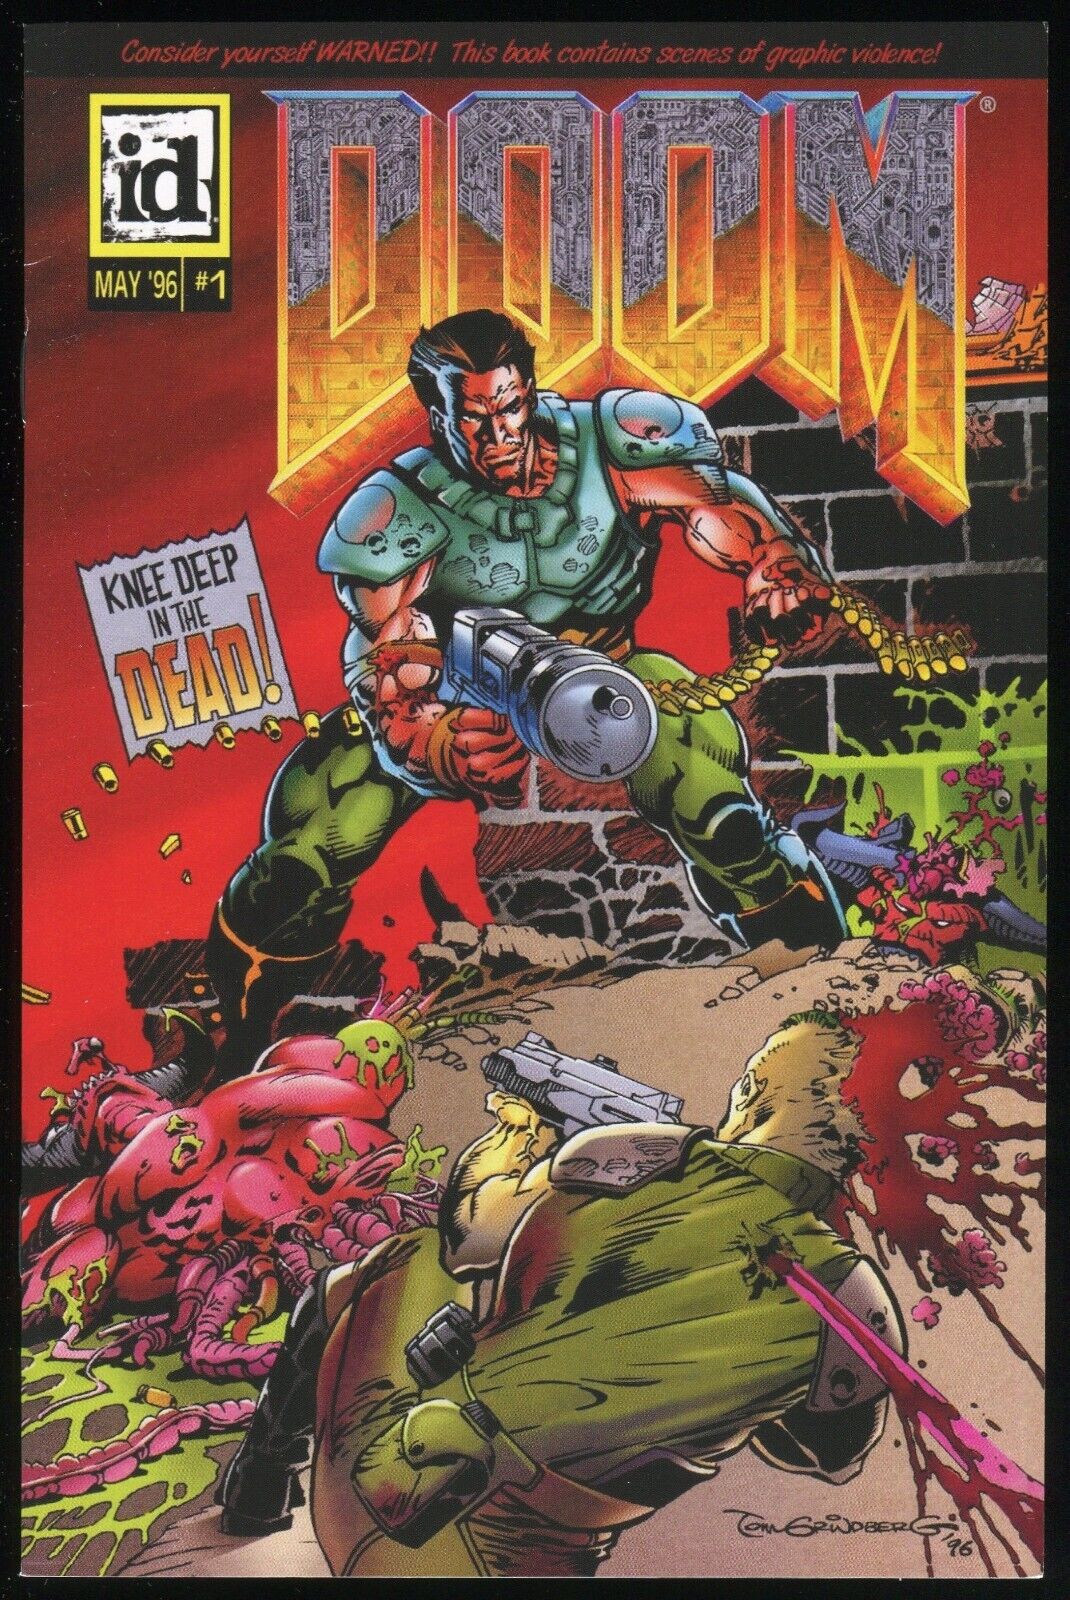 Doom Video Game One-Shot Reprint Comic id Software Horror Knee Deep in the Dead